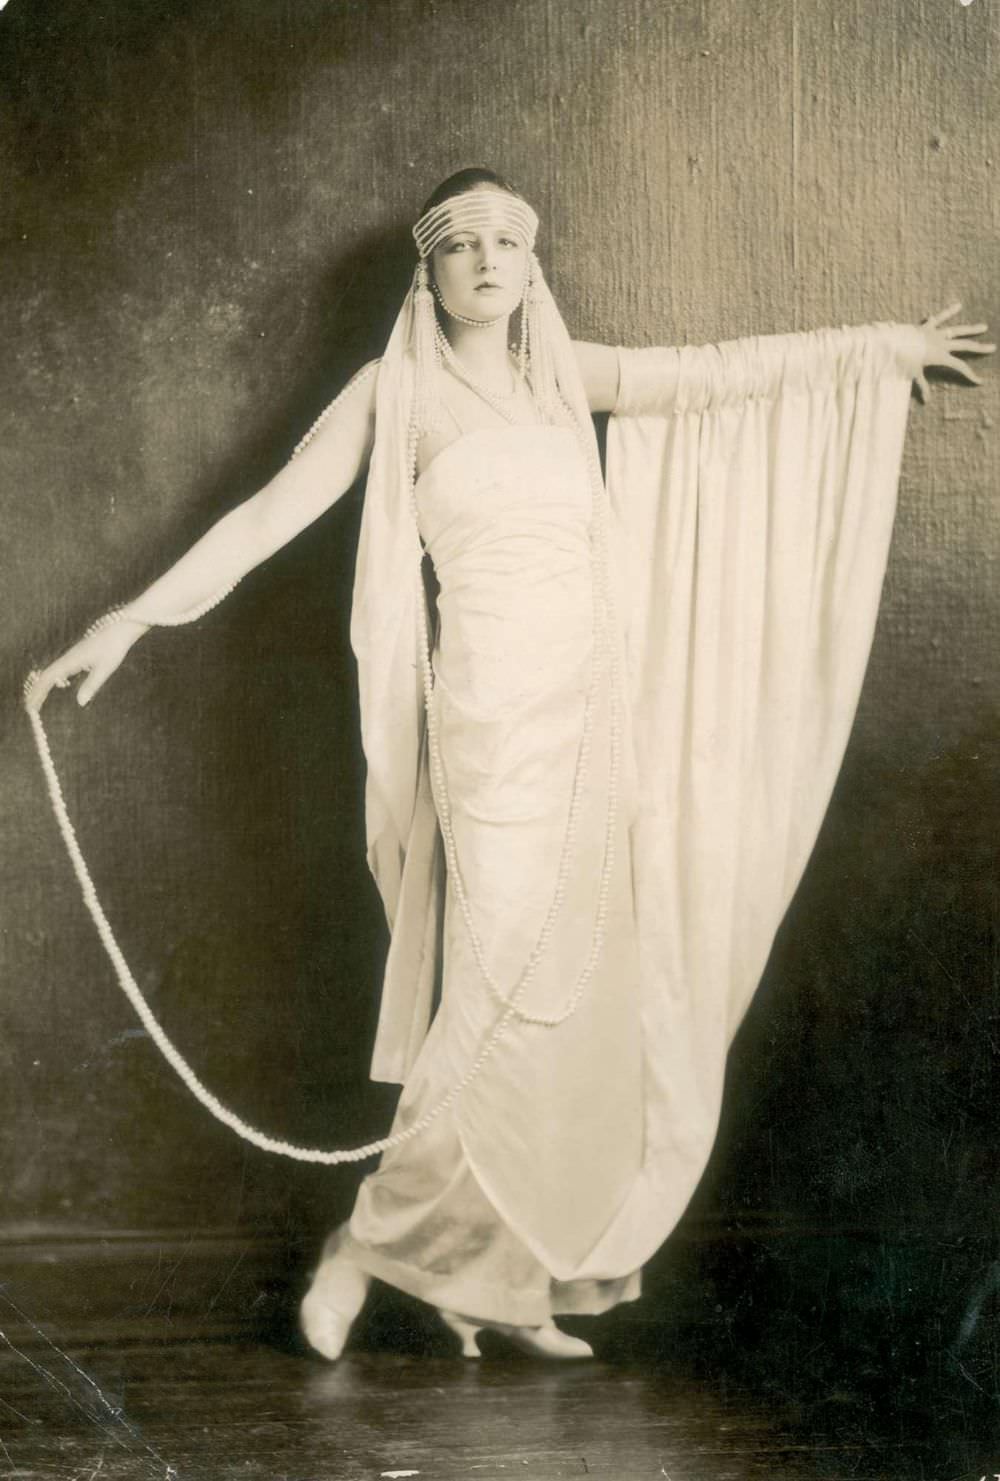 Showgirl Dolores Costello in 1919. She was a star of the Ziegfeld Follies and a leading influence on fashion.